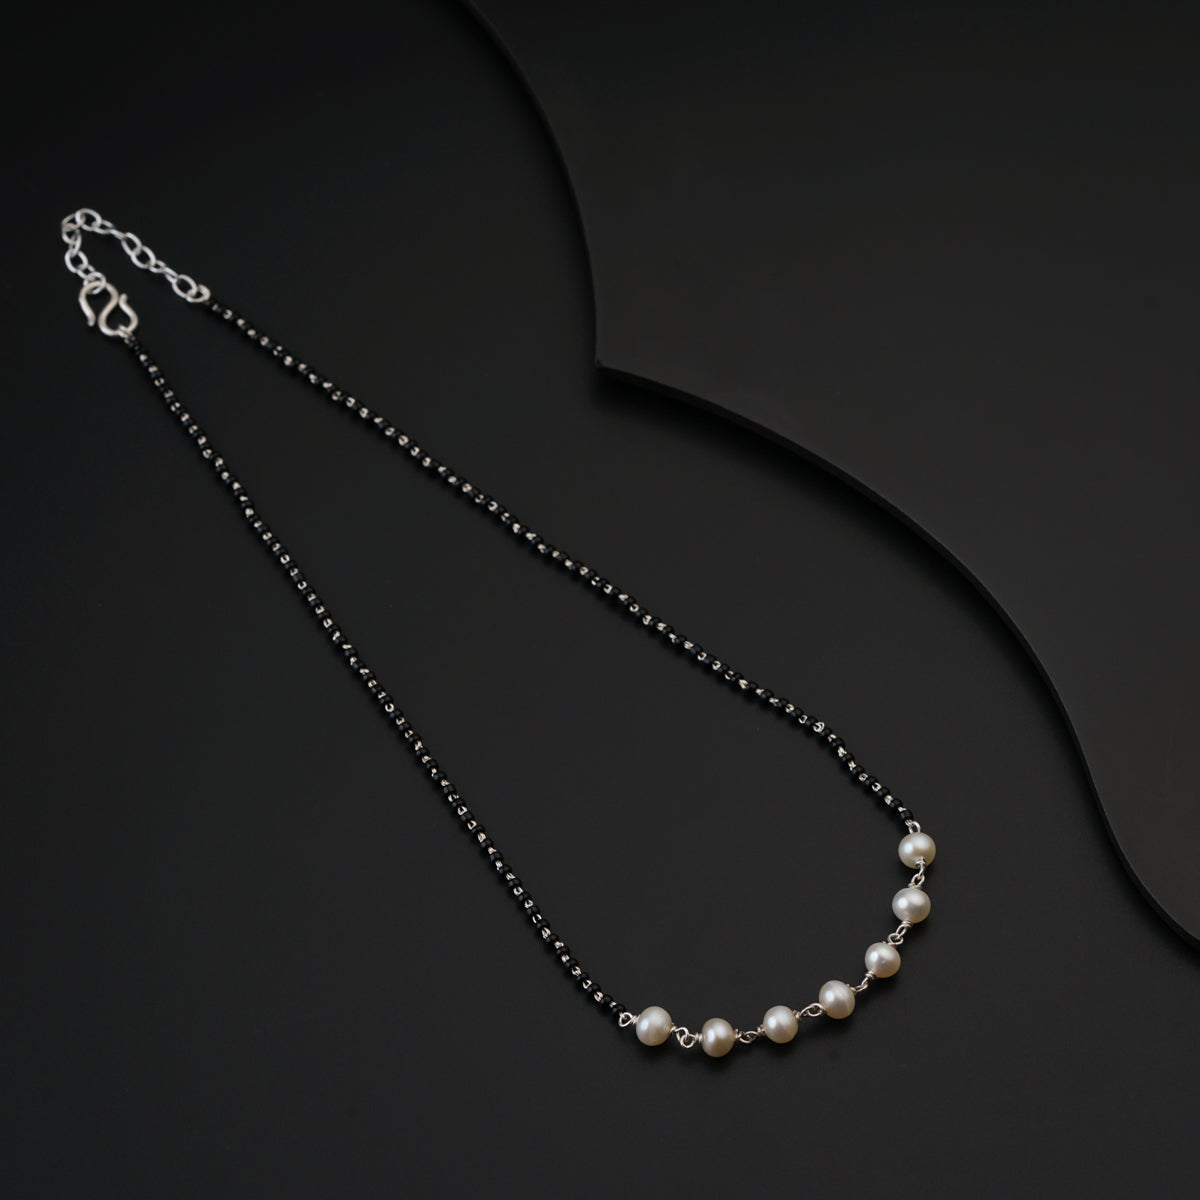 a black and white necklace with pearls on a black background